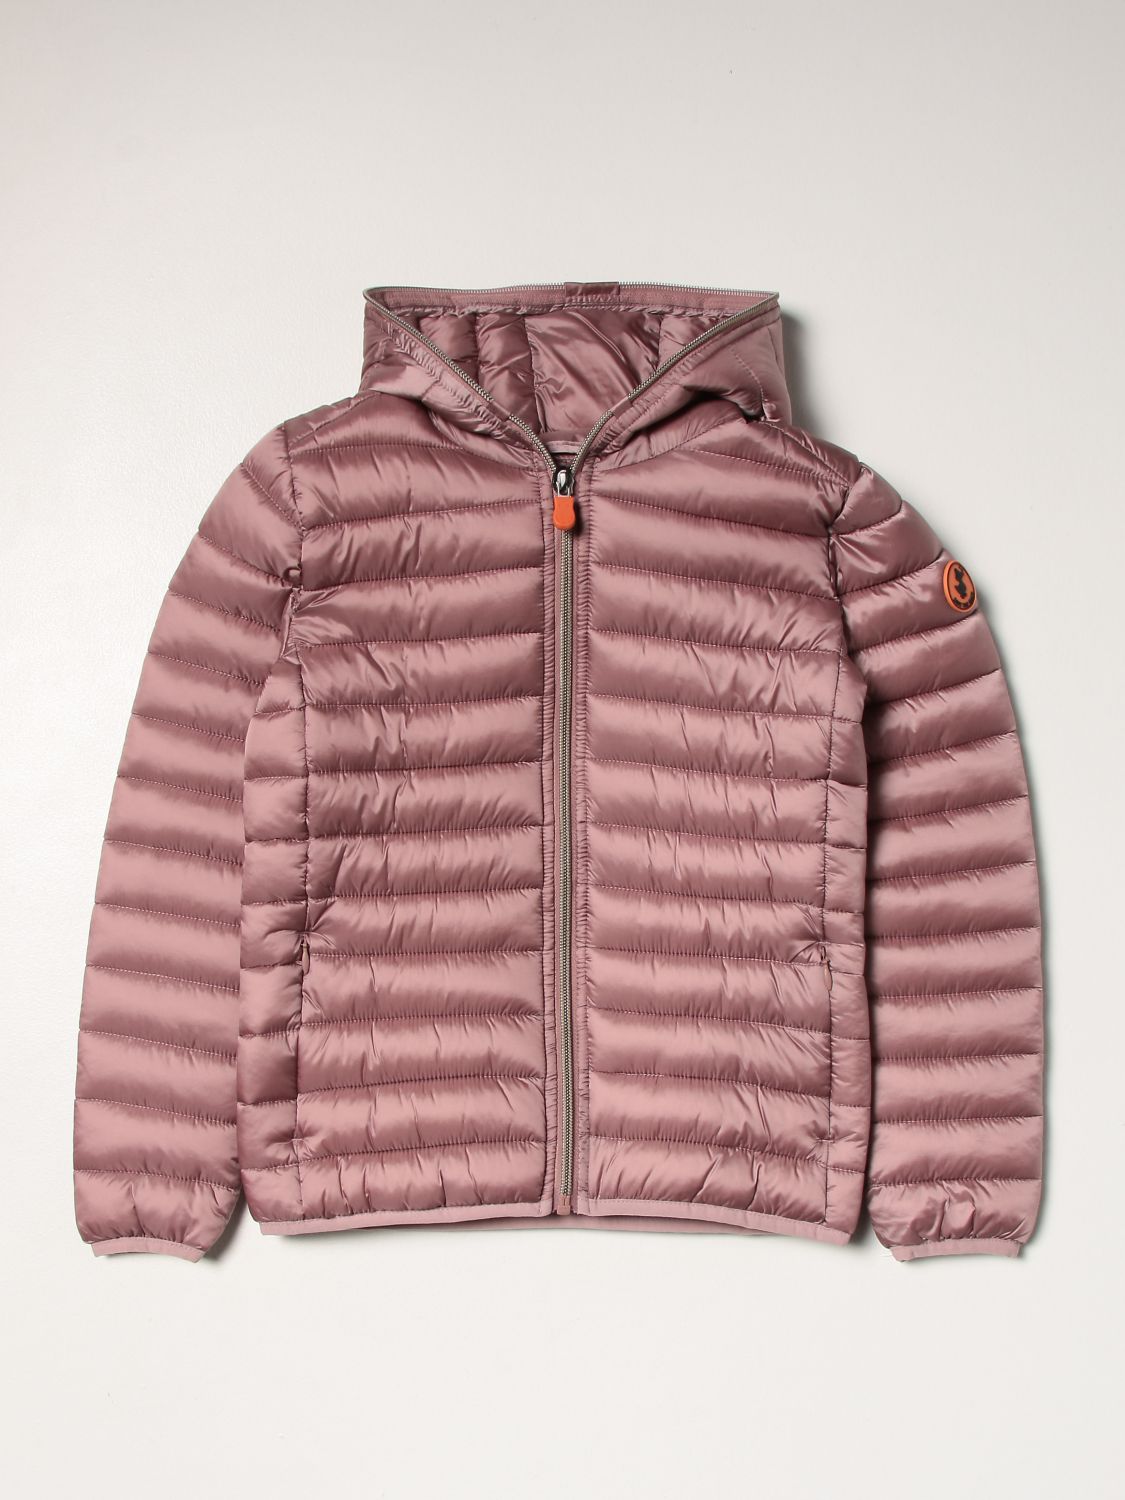 Jacket Save The Duck: Jacket kids Save The Duck blush pink 1